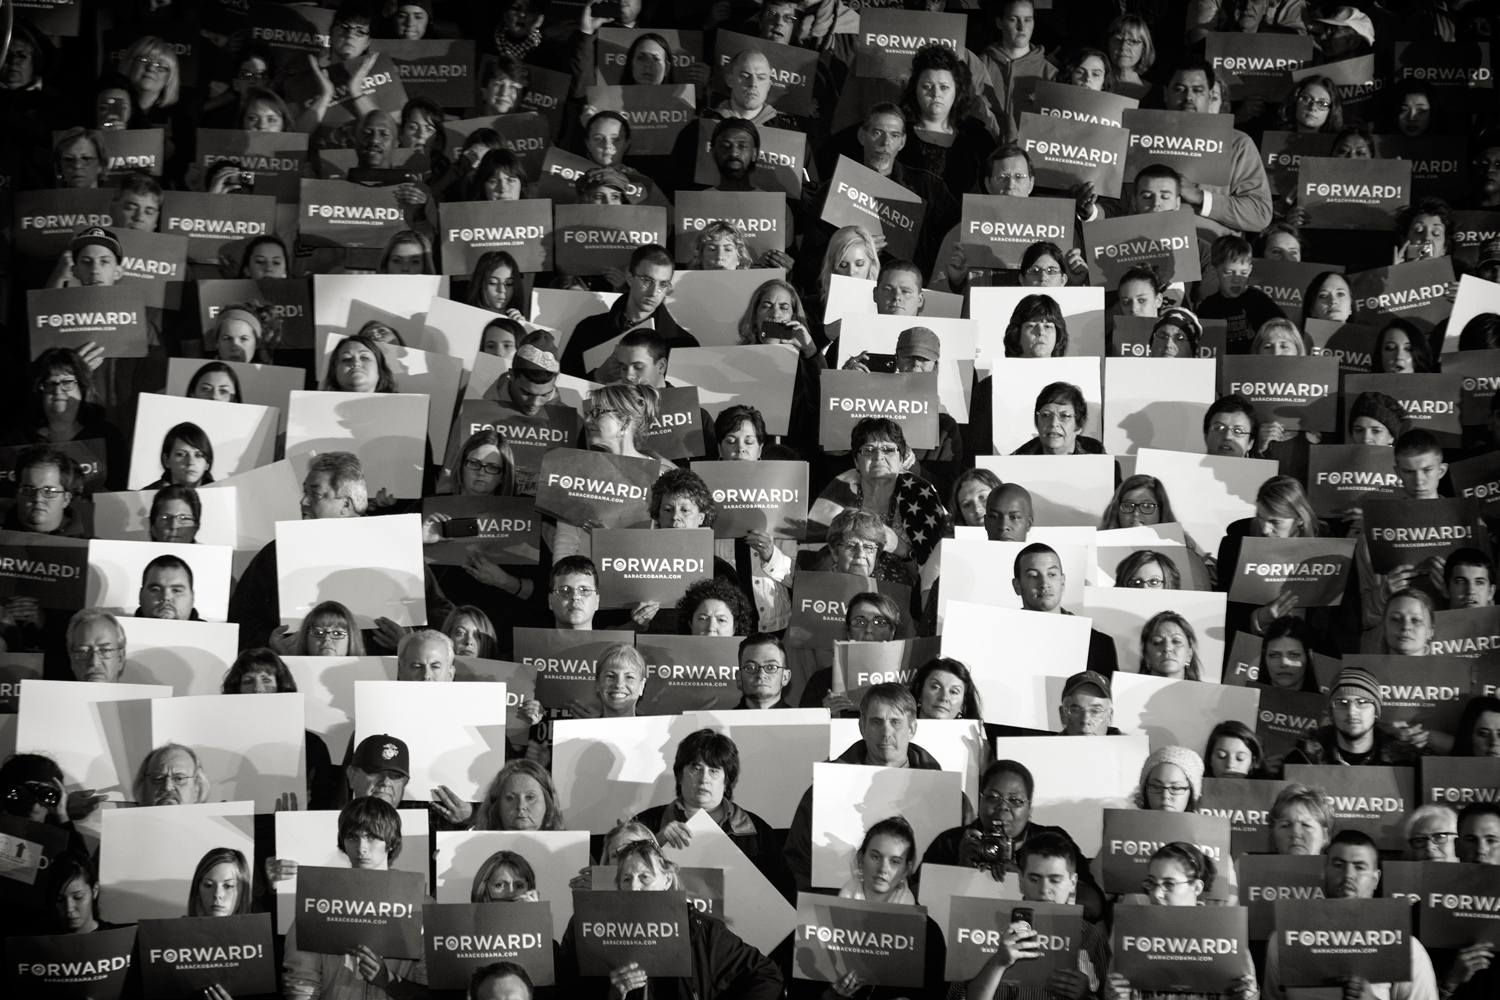 Image: Nov. 3, 2012. Members of the audience make an "O" during a campaign rally with President Obama in Mentor, Ohio. Nov. 3, 2012.